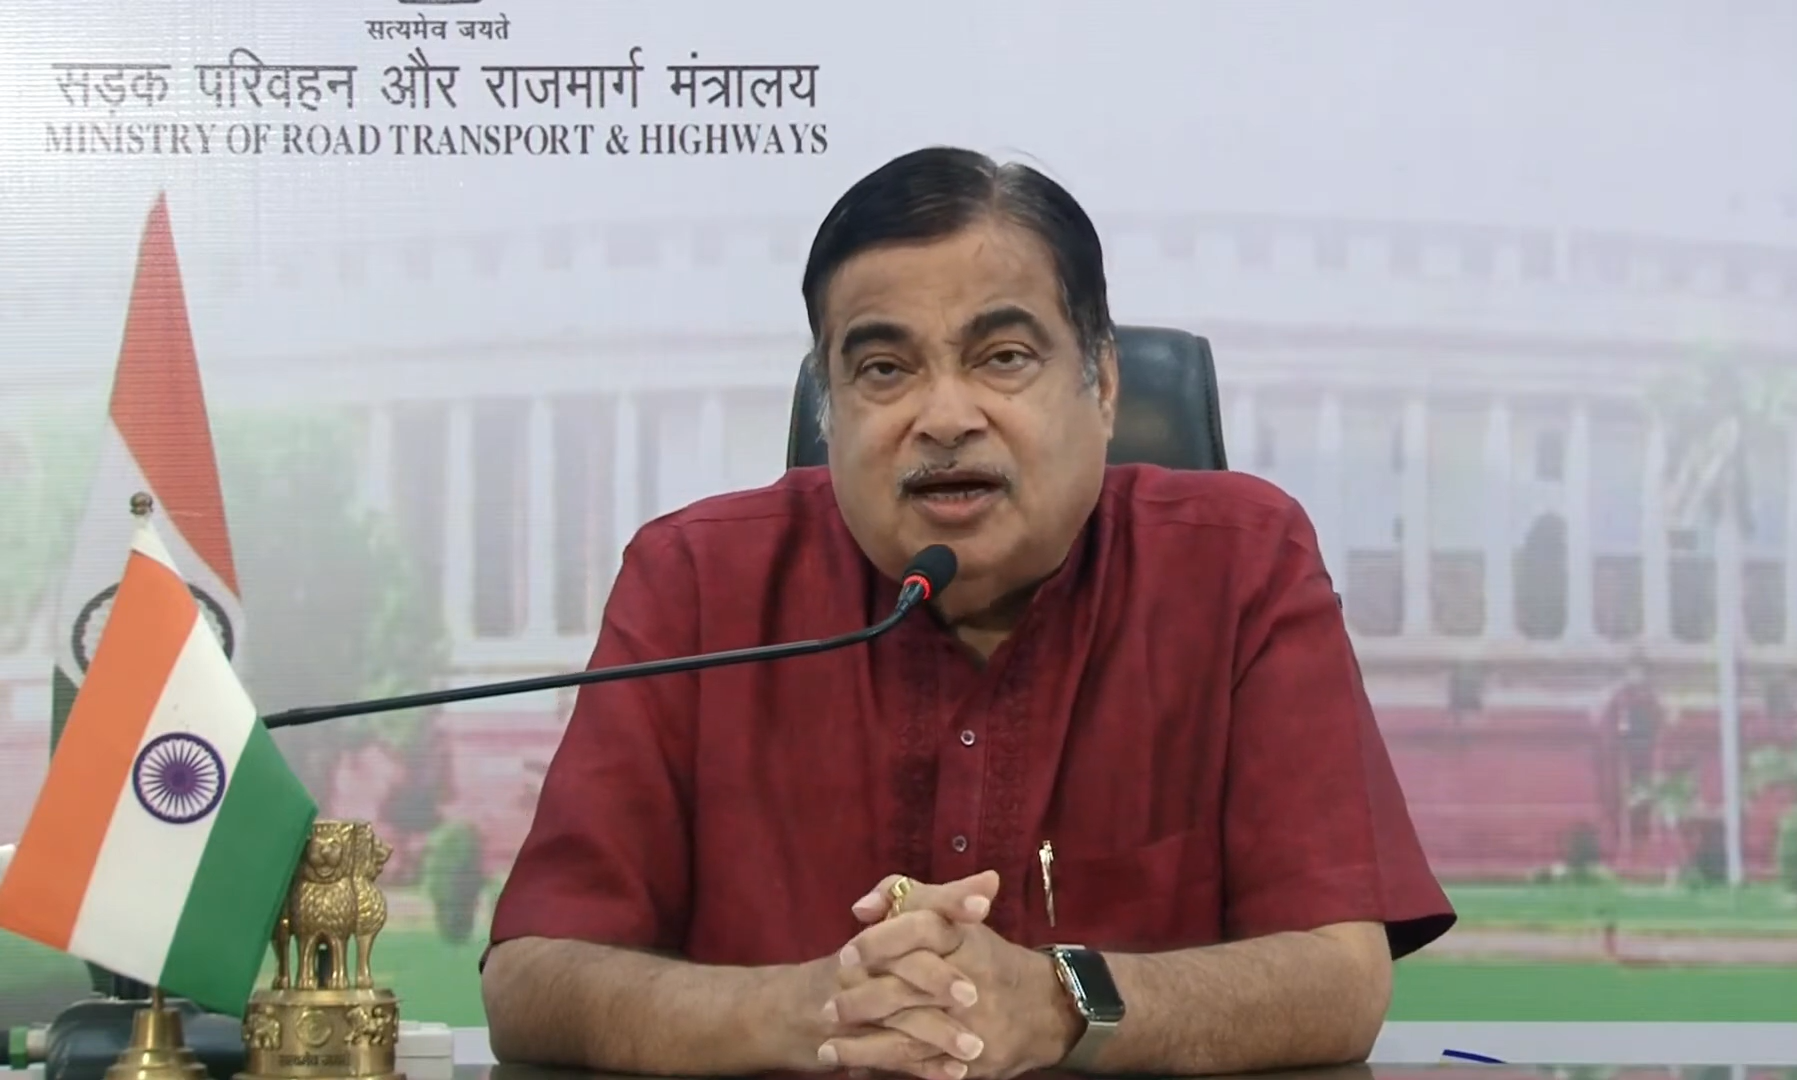 Road infrastructure connects people, culture and society and brings prosperity through socio-economic development: Nitin Gadkari